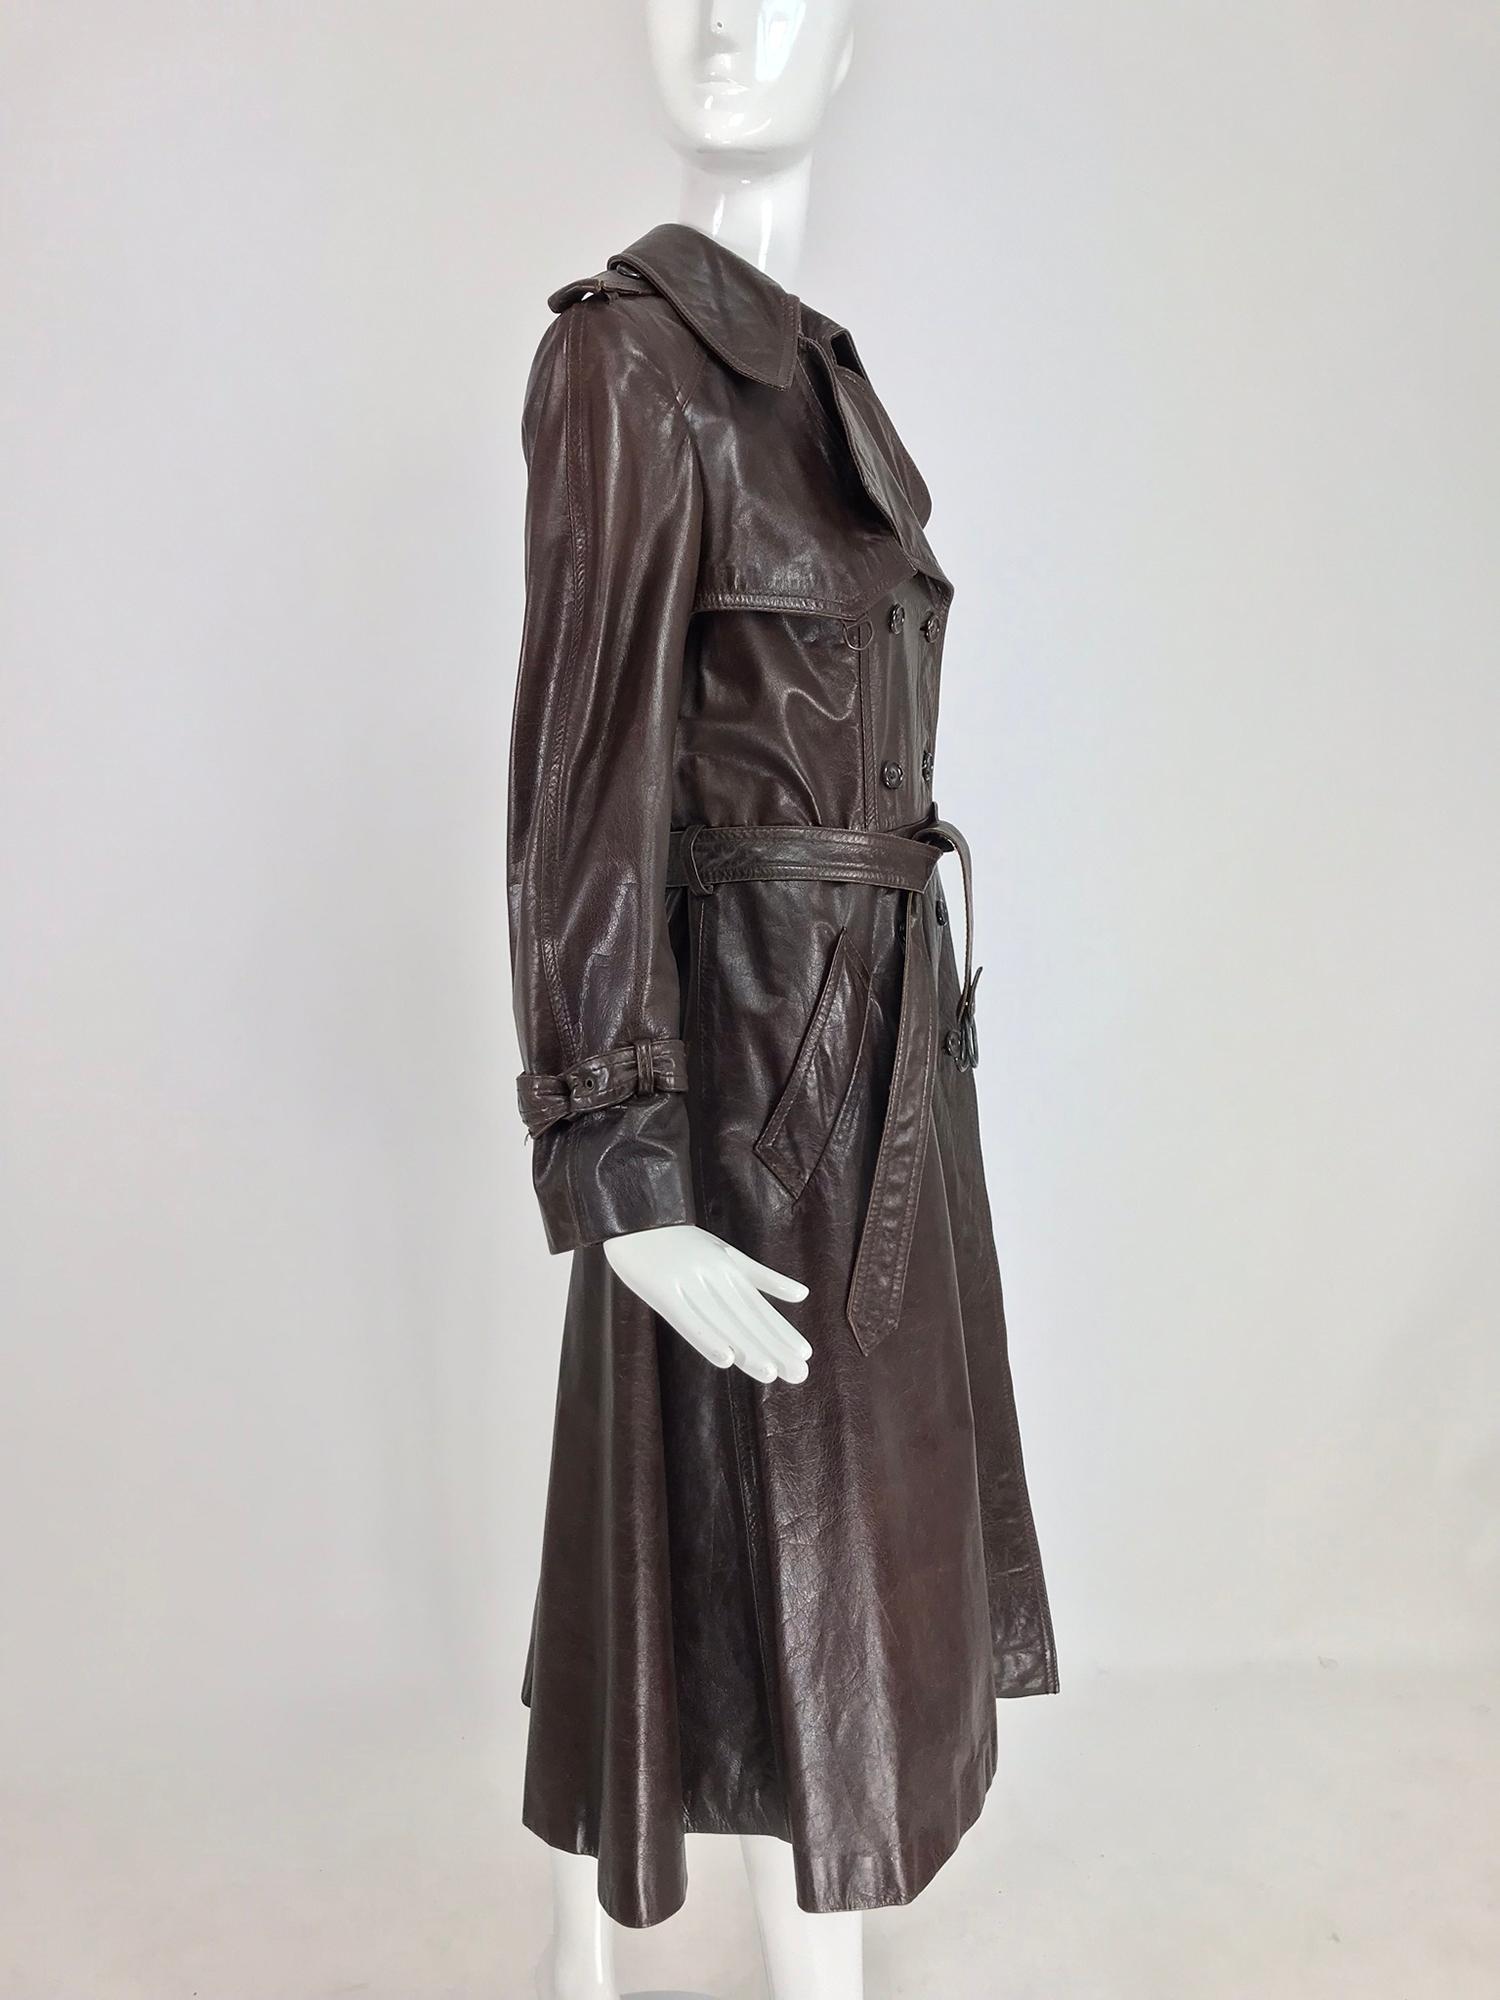 Anne Klein Chocolate brown leather trench coat 1970s 5